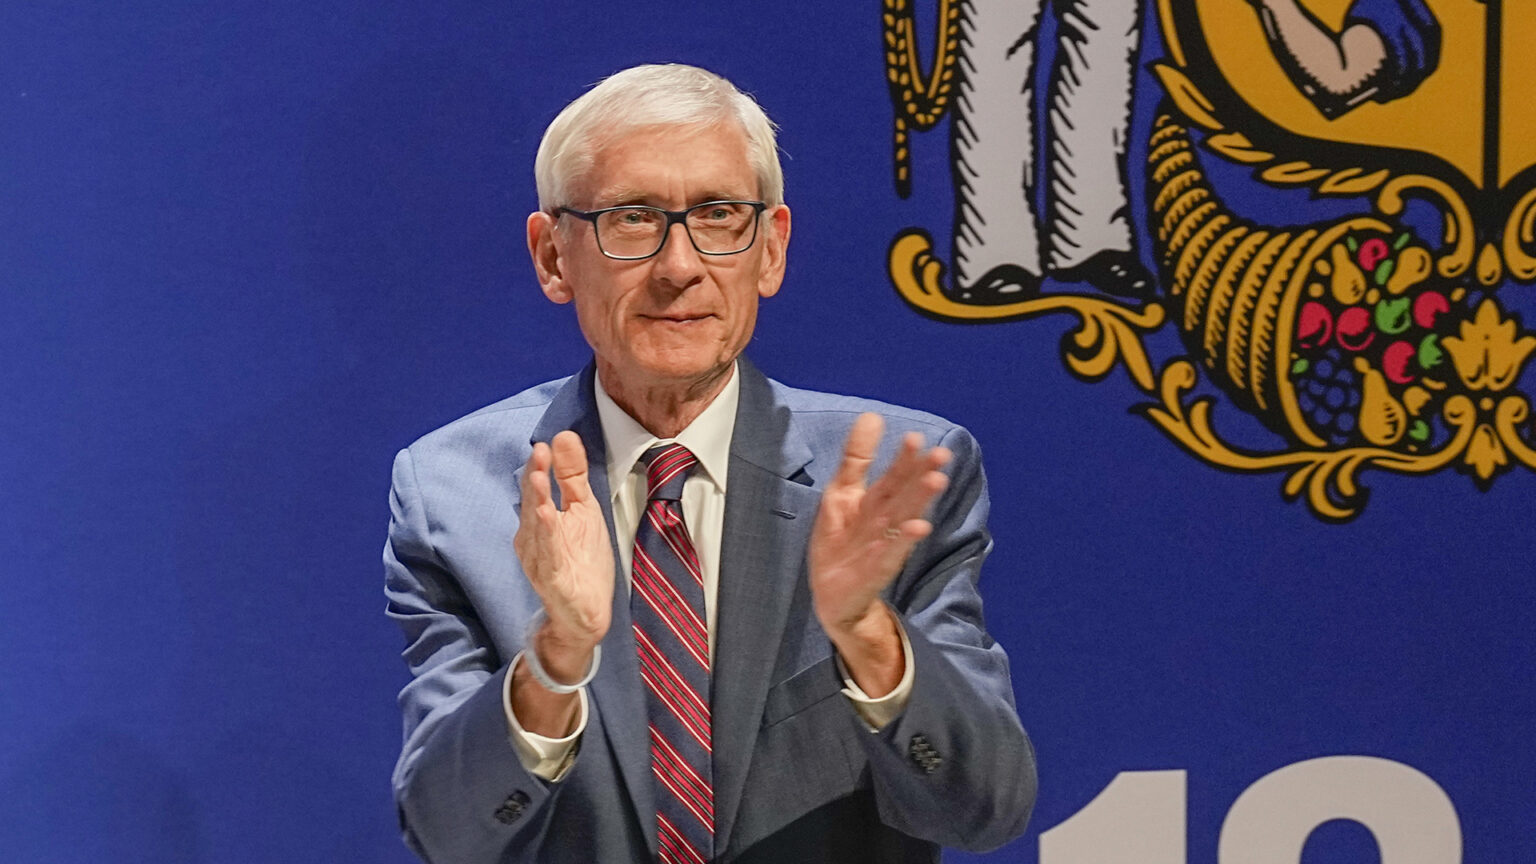 Tony Evers claps his hands while standing in front of a large image of the Wisconsin flag.